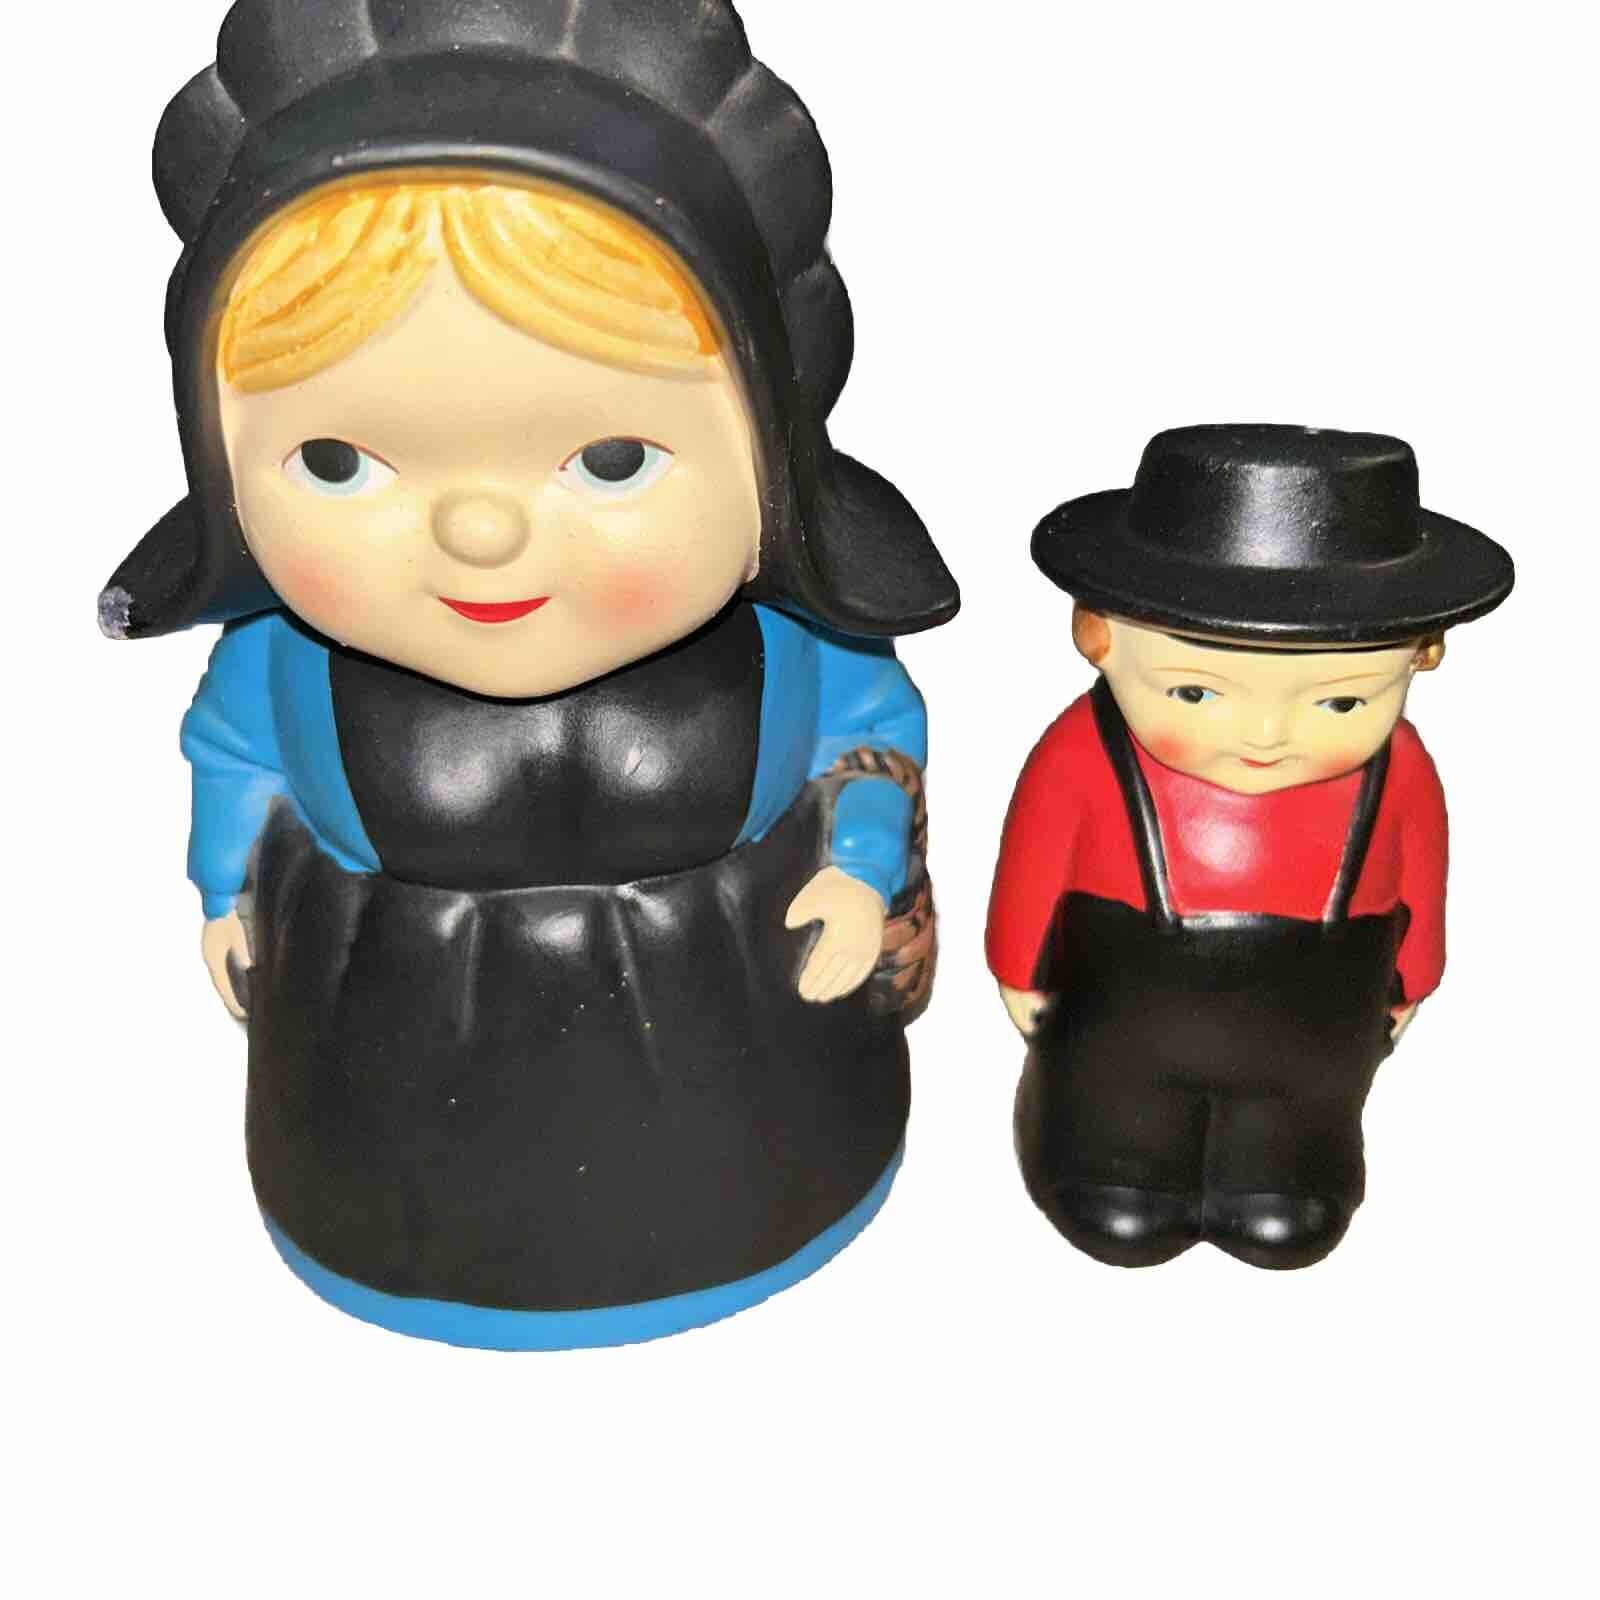 Vintage Pennsylvania Dutch Amish Man & Woman Coin Bank 6” Figures Made In Japan